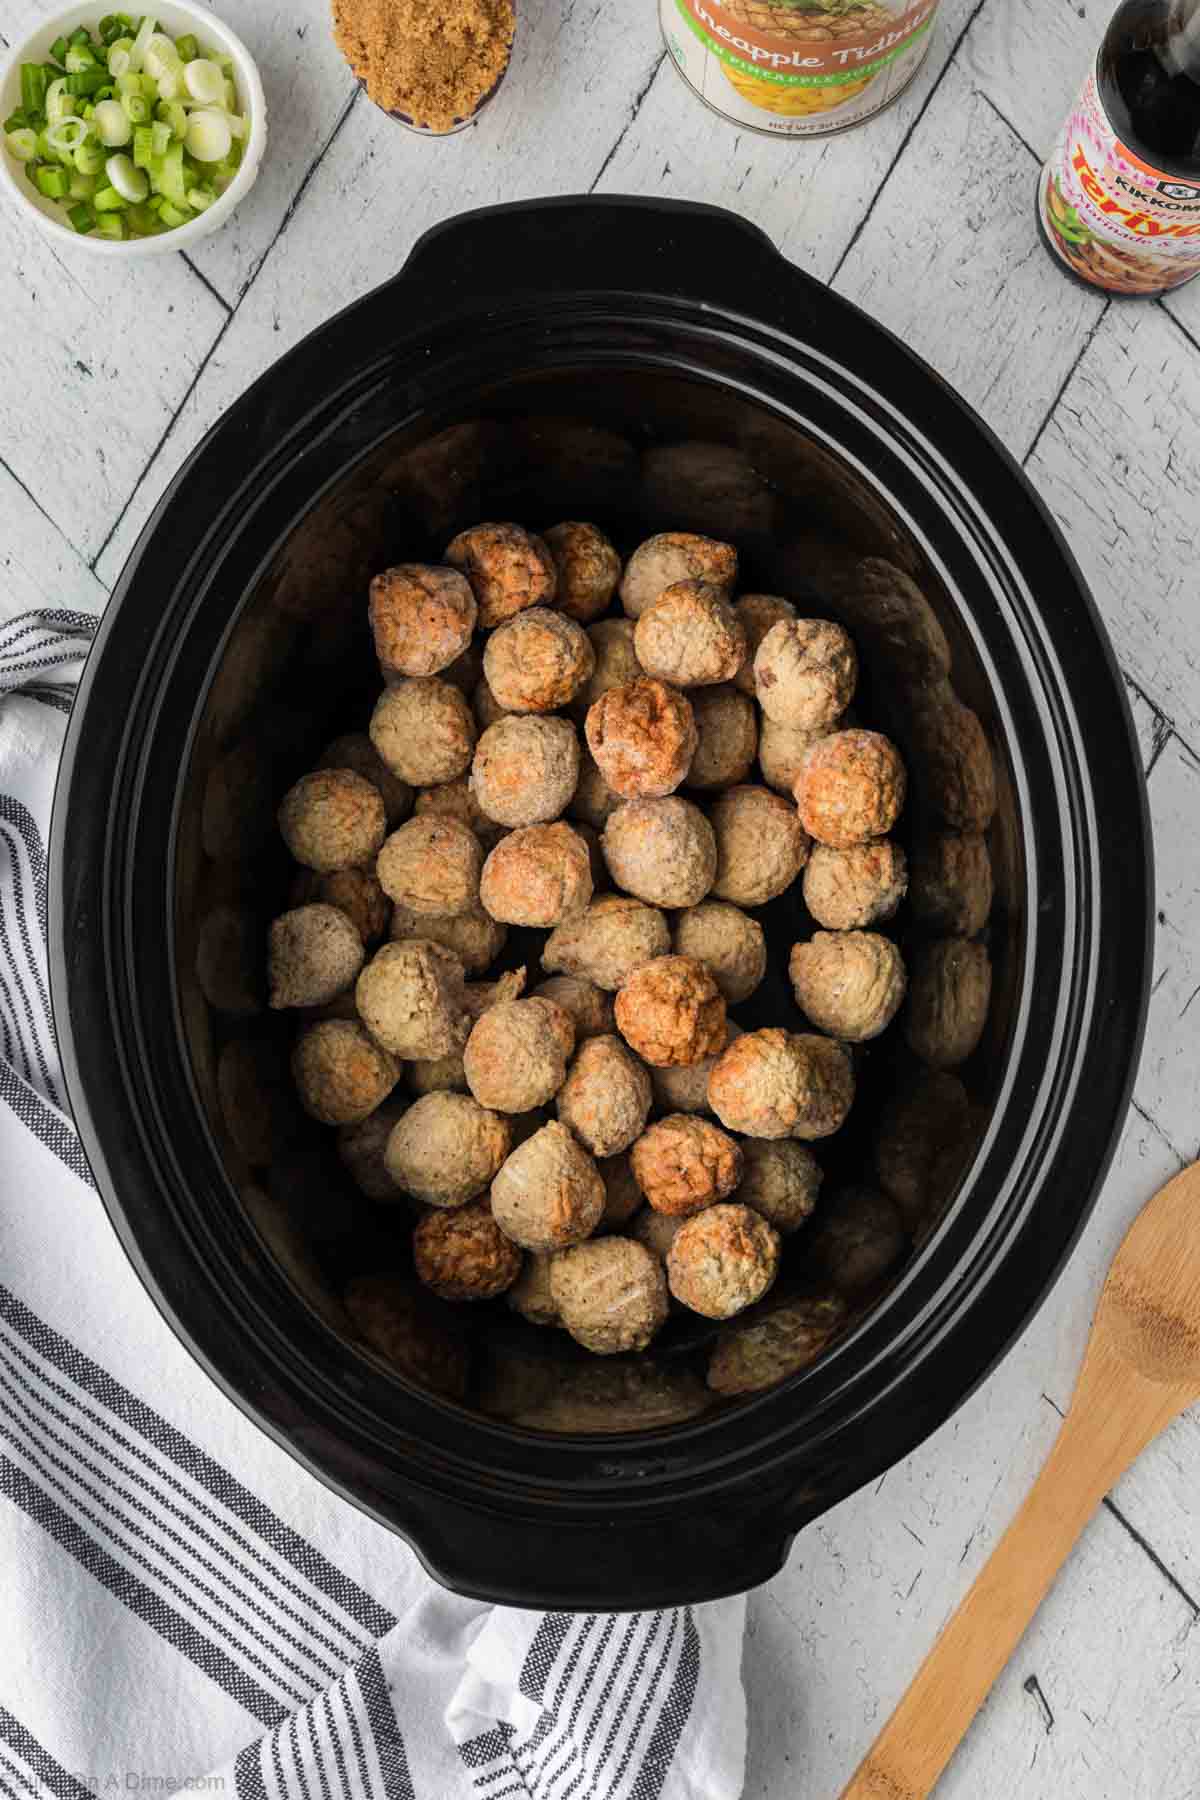 Placing meatballs in the slow cooker